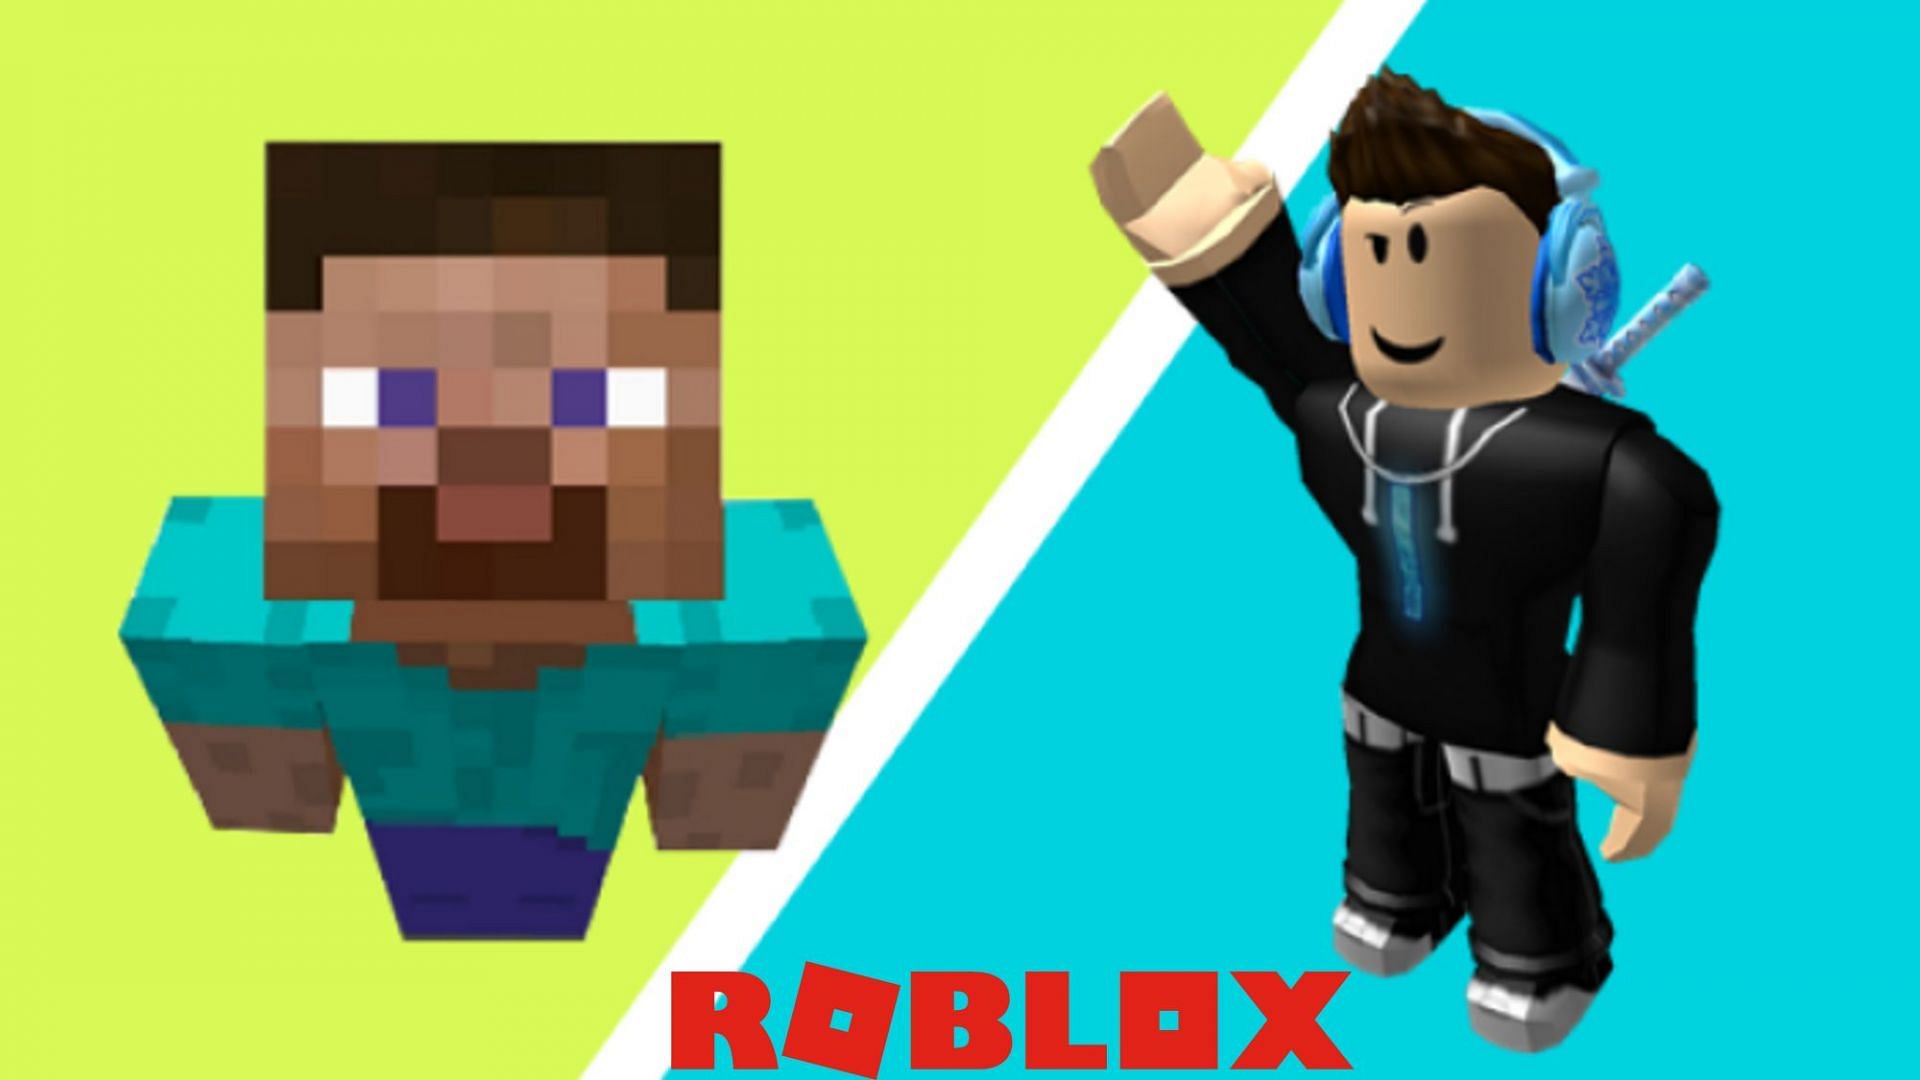 Reasons to check out Roblox games (Image via Facebook Inc.)